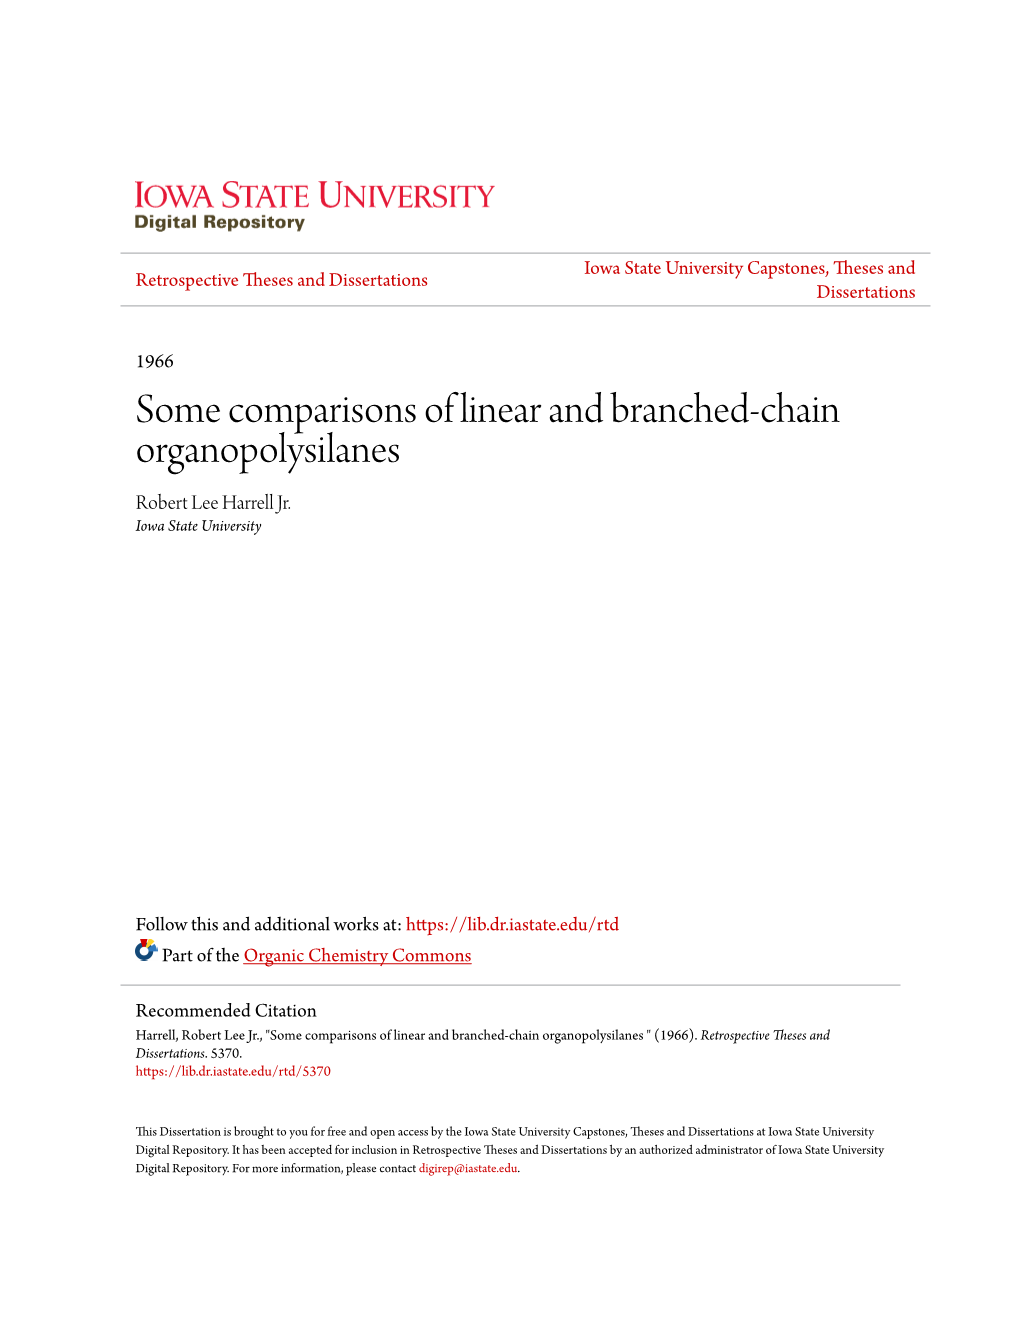 Some Comparisons of Linear and Branched-Chain Organopolysilanes Robert Lee Harrell Jr